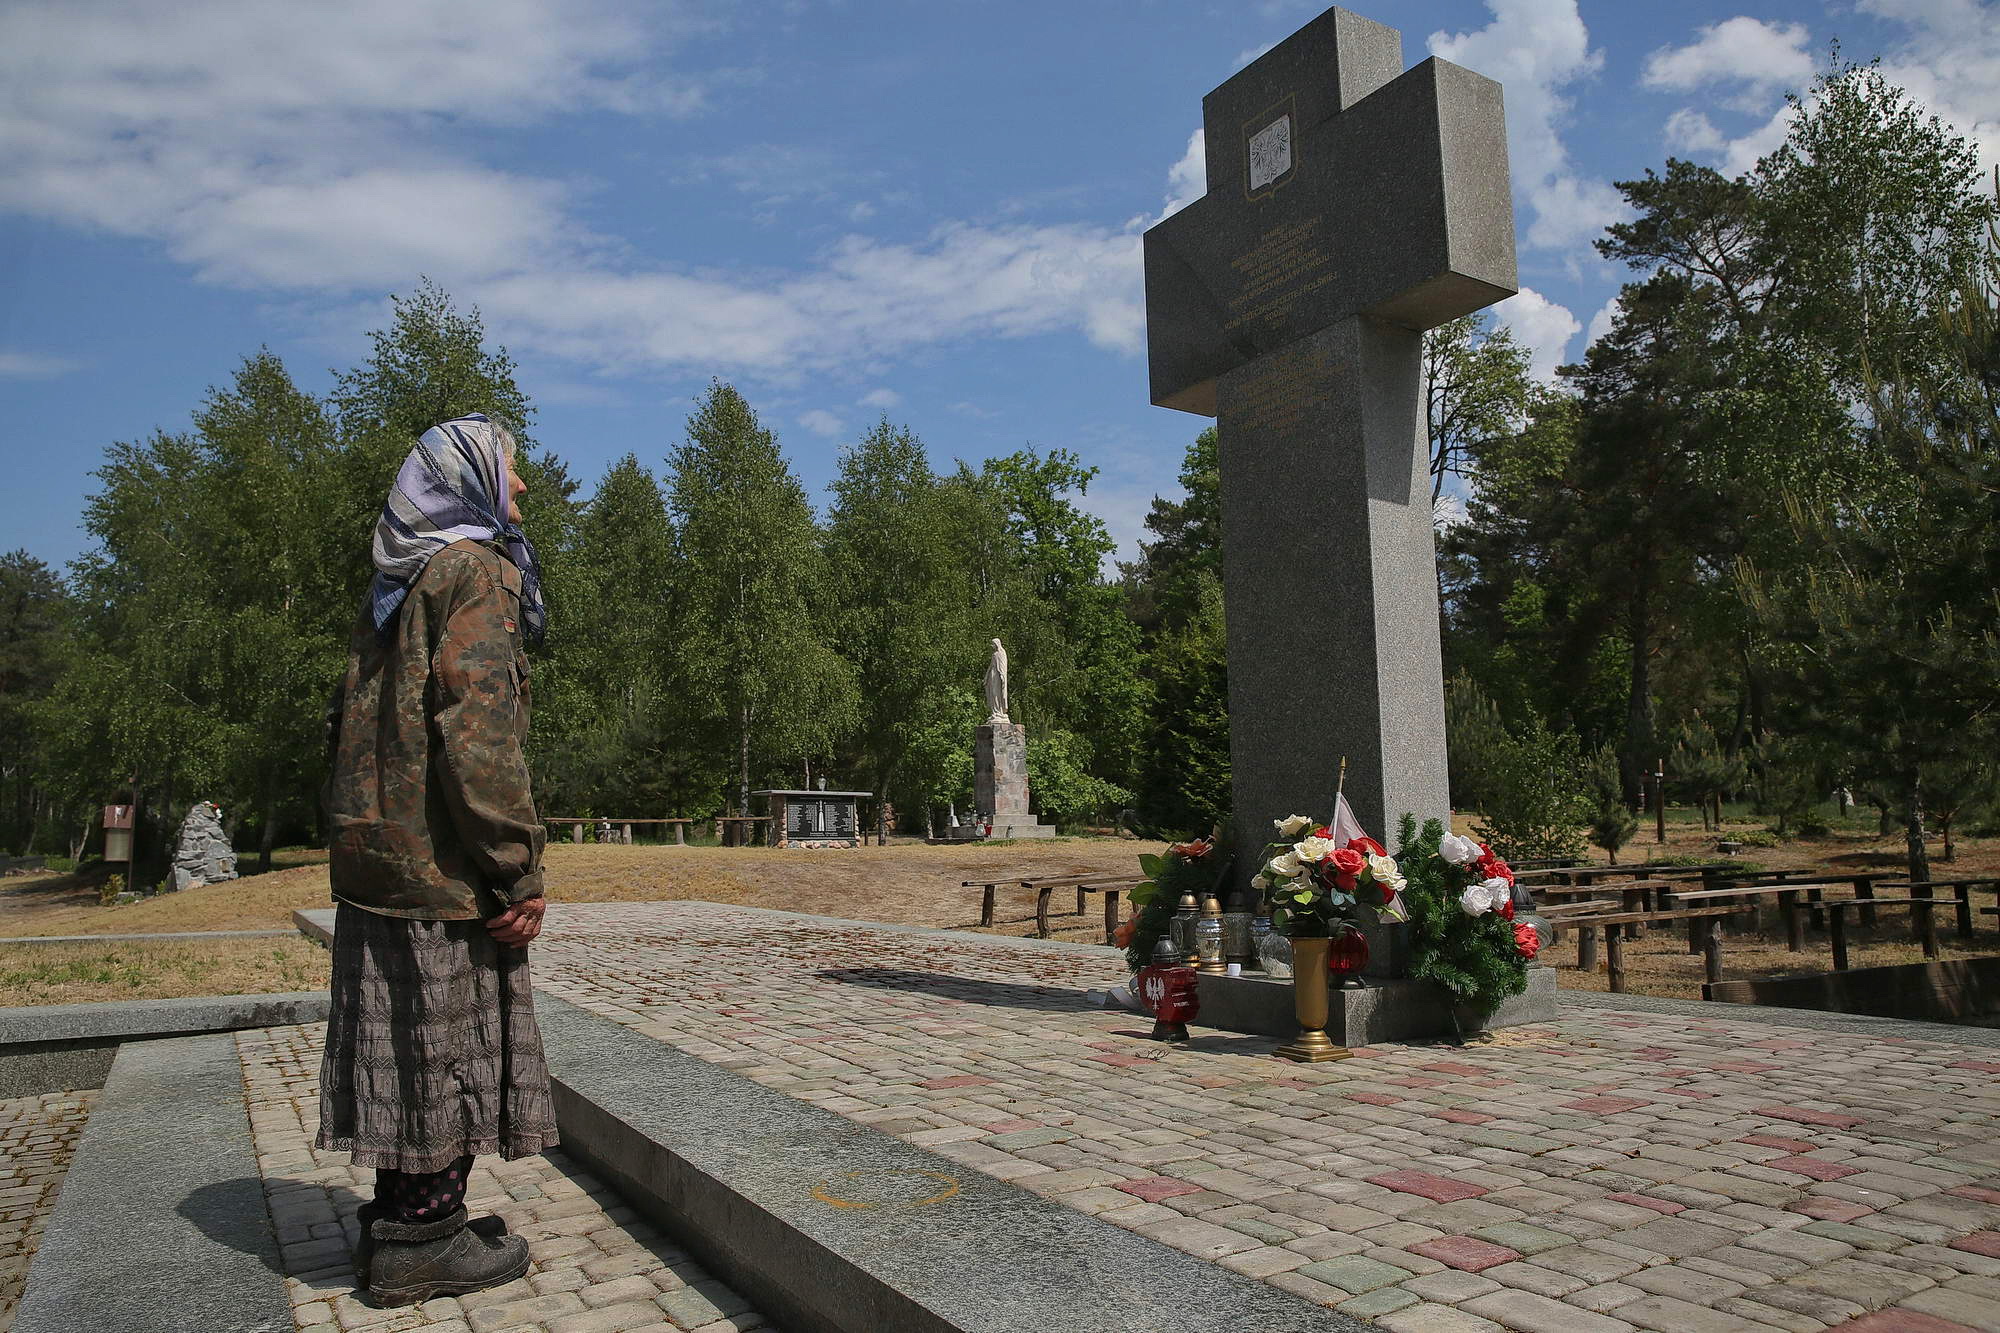 Oleksandra Vaseiko looks at a cross hoisted in commemoration of hundreds of Poles killed in the area in 1943 near her village of Sokil in Volyn Oblast.